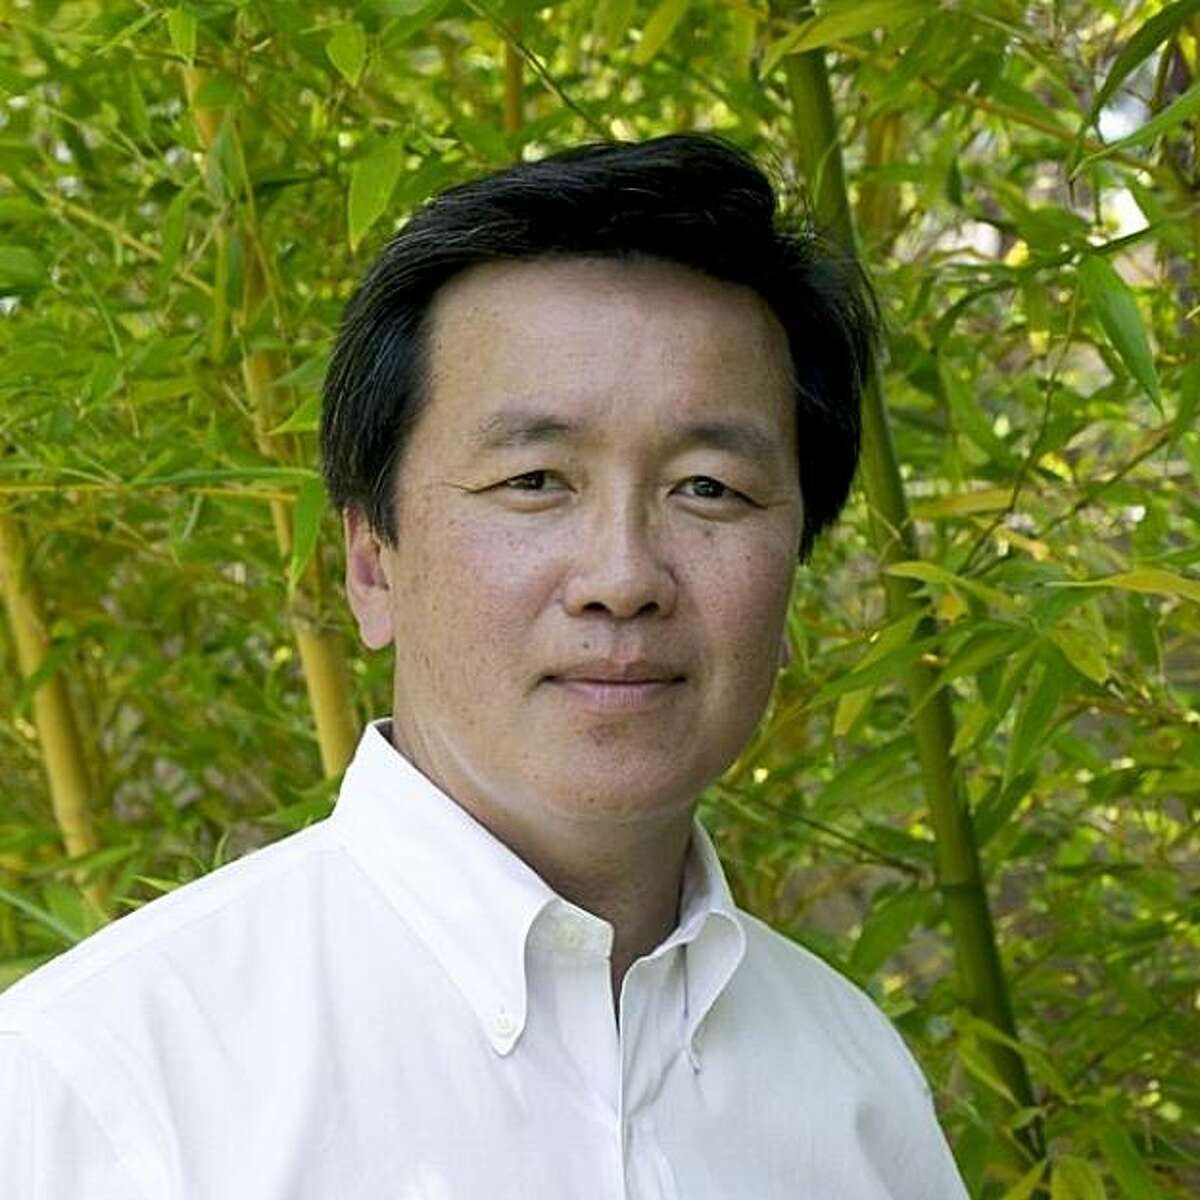 John Wong is a managing principal of SWA Group, a leading landscape architecture firm with offices in San Francisco and Sausalito